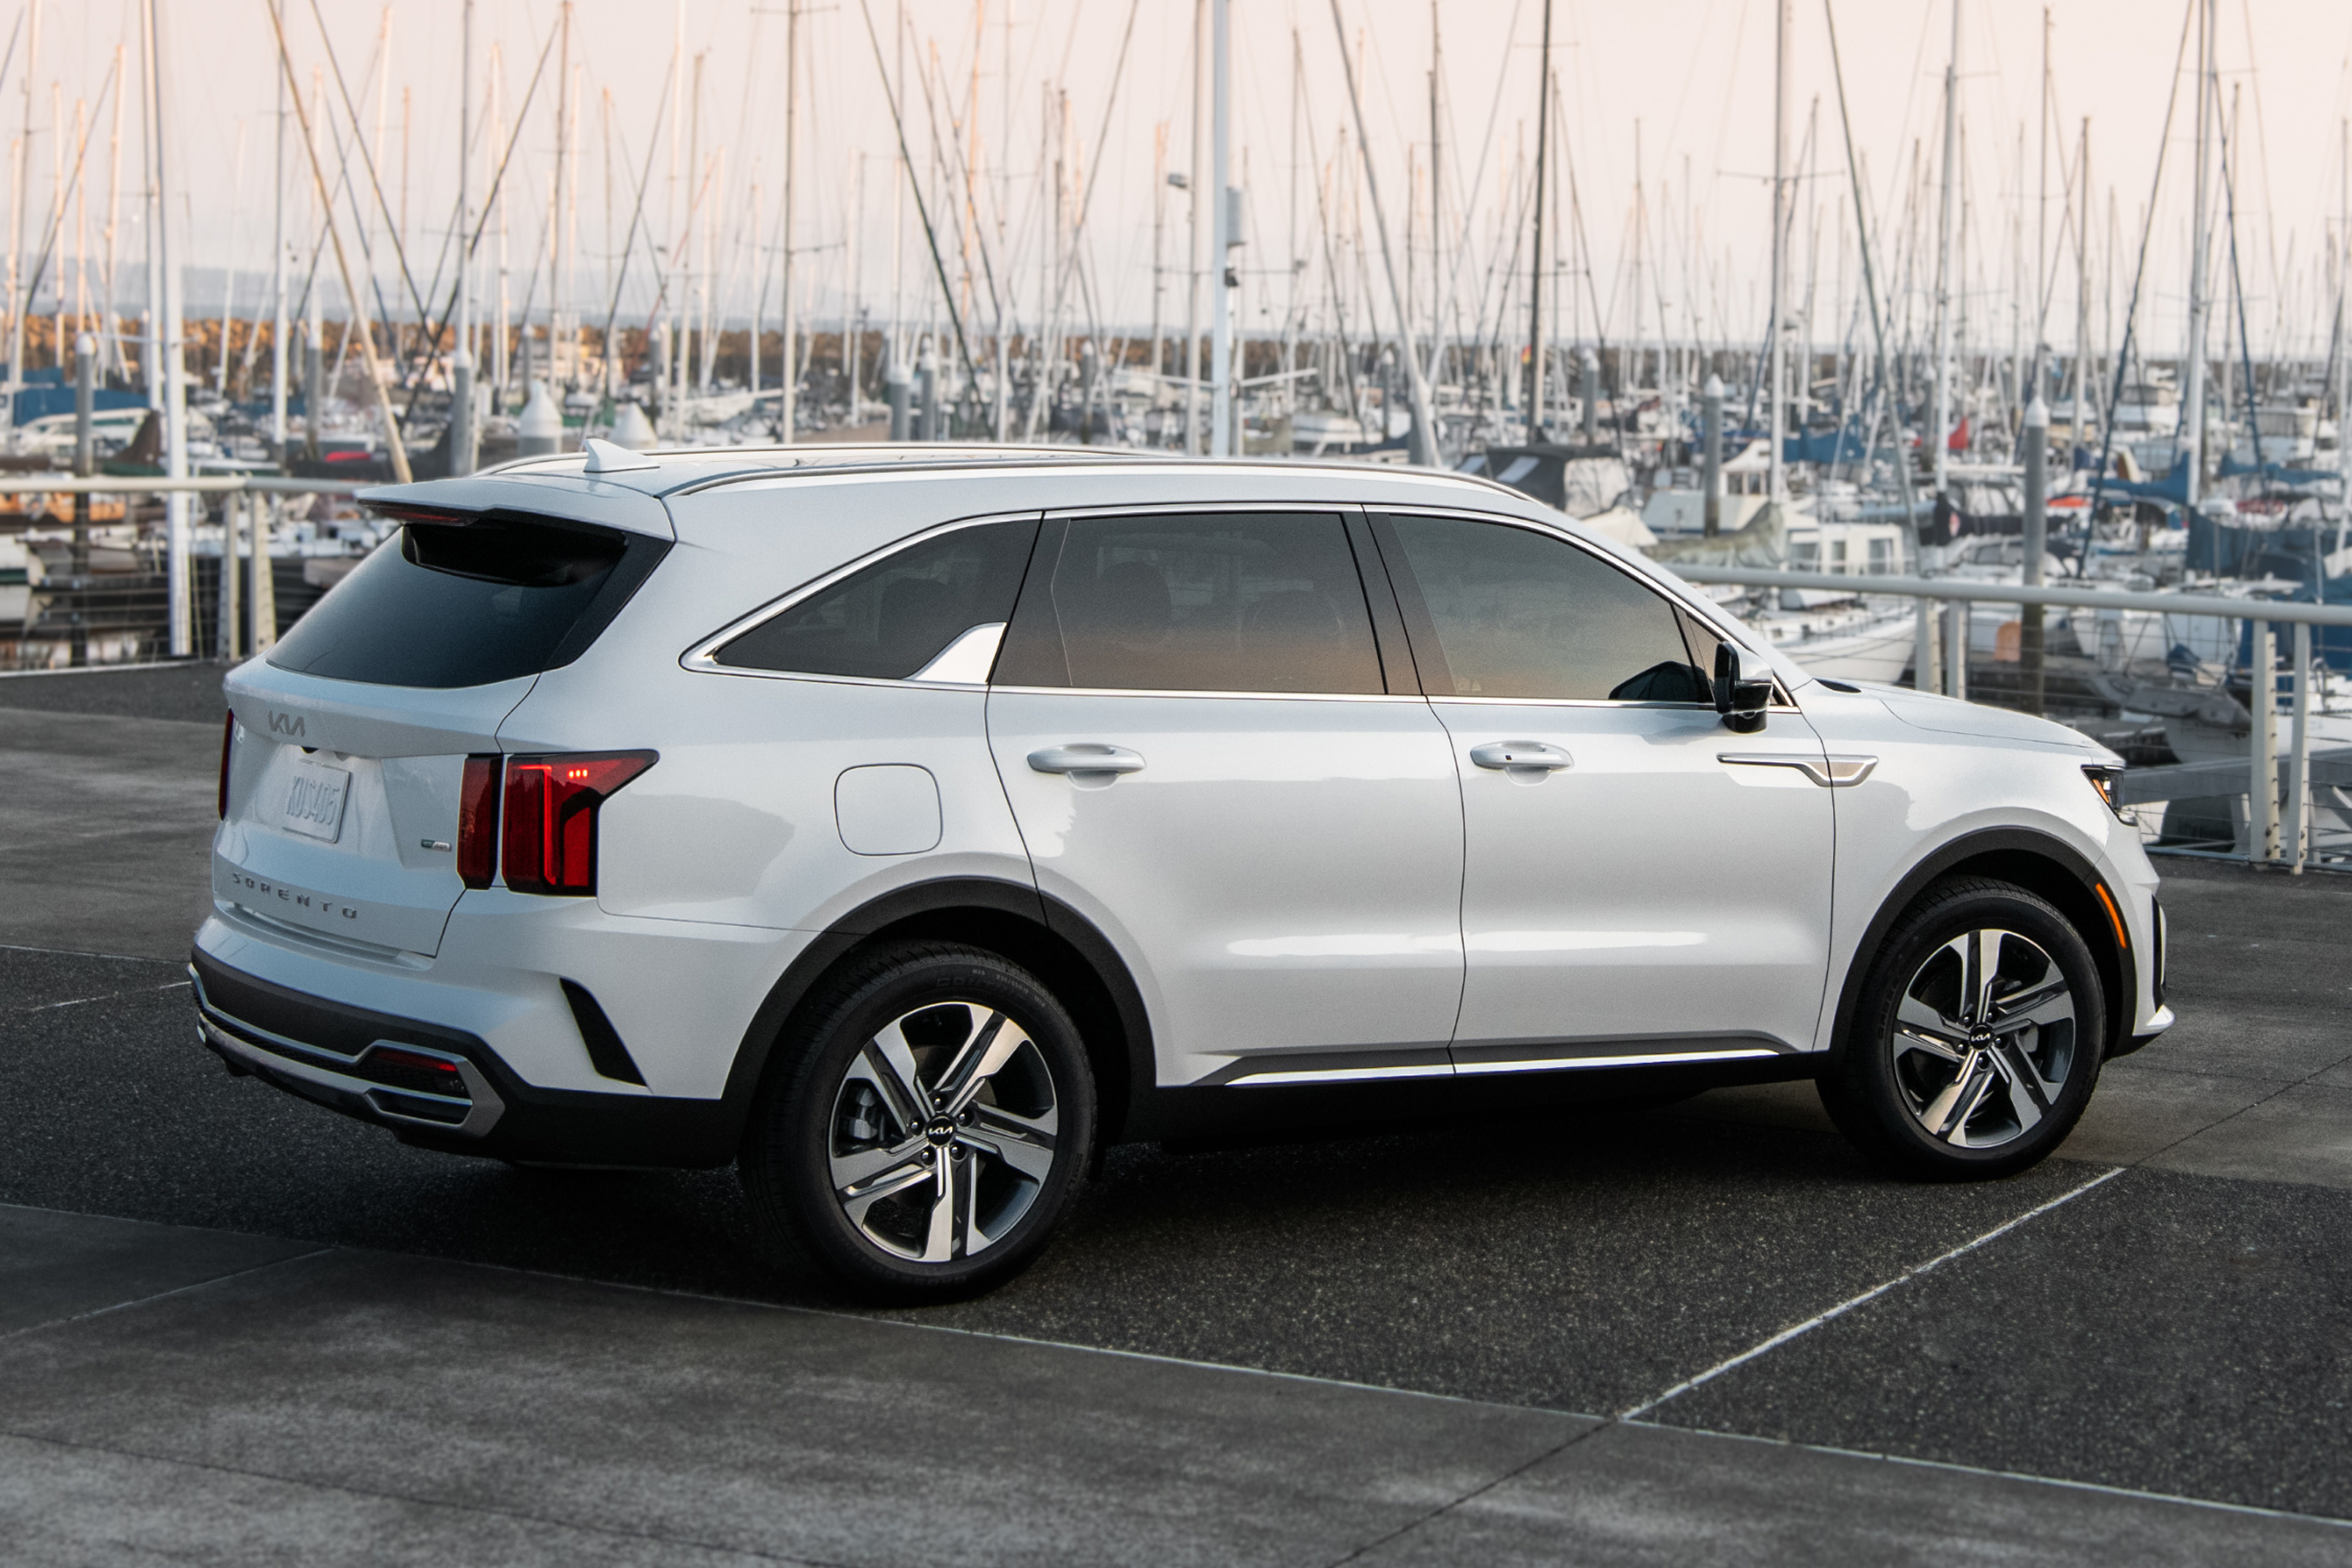 White Sorento Exterior Rear with boats in the background